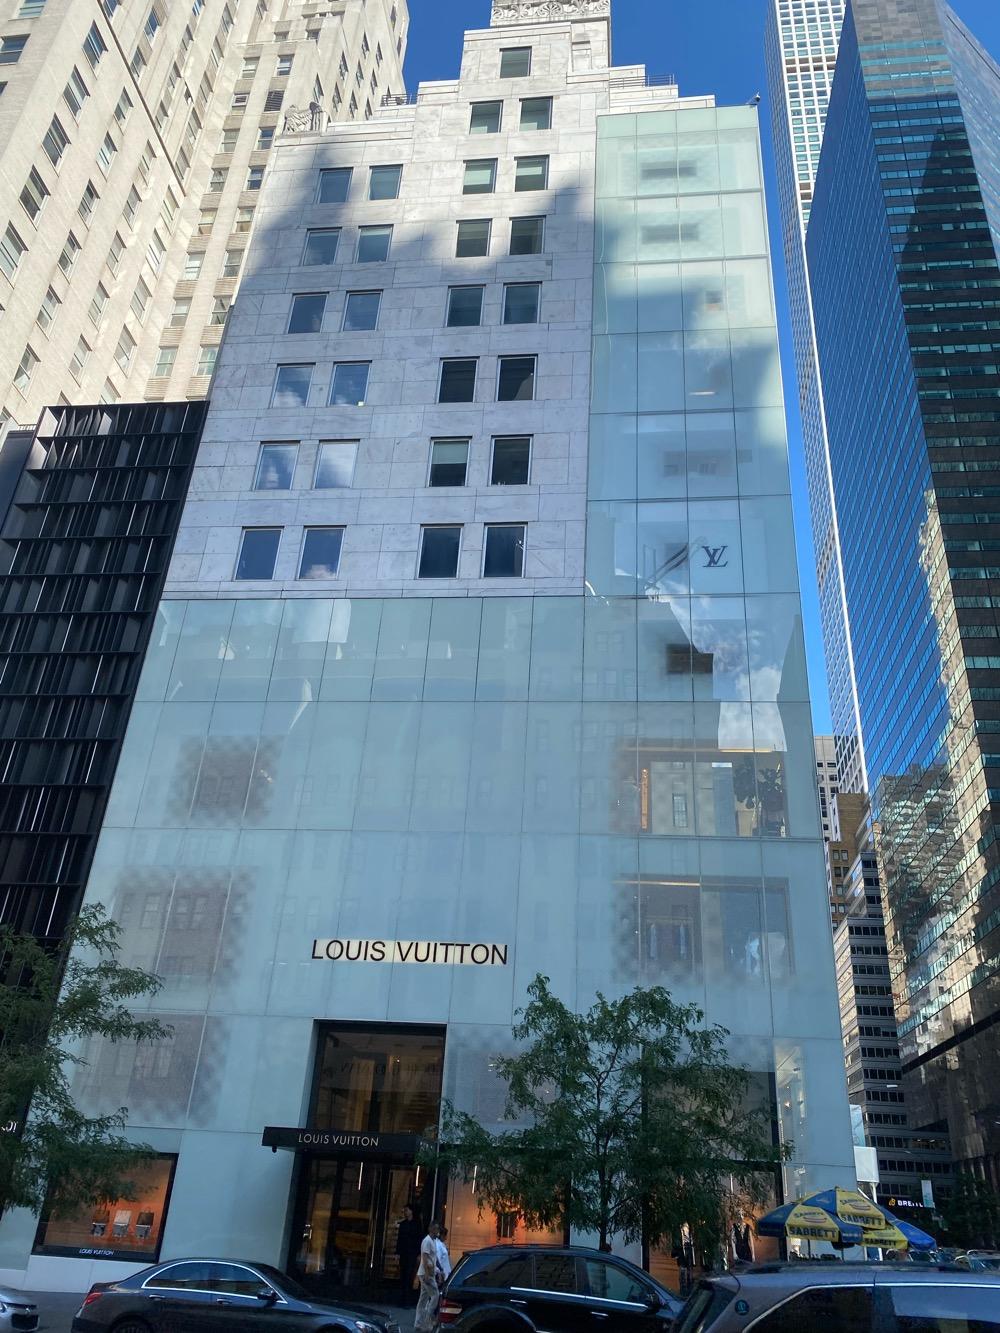 Louis Vuitton - Midtown East - New York, NY